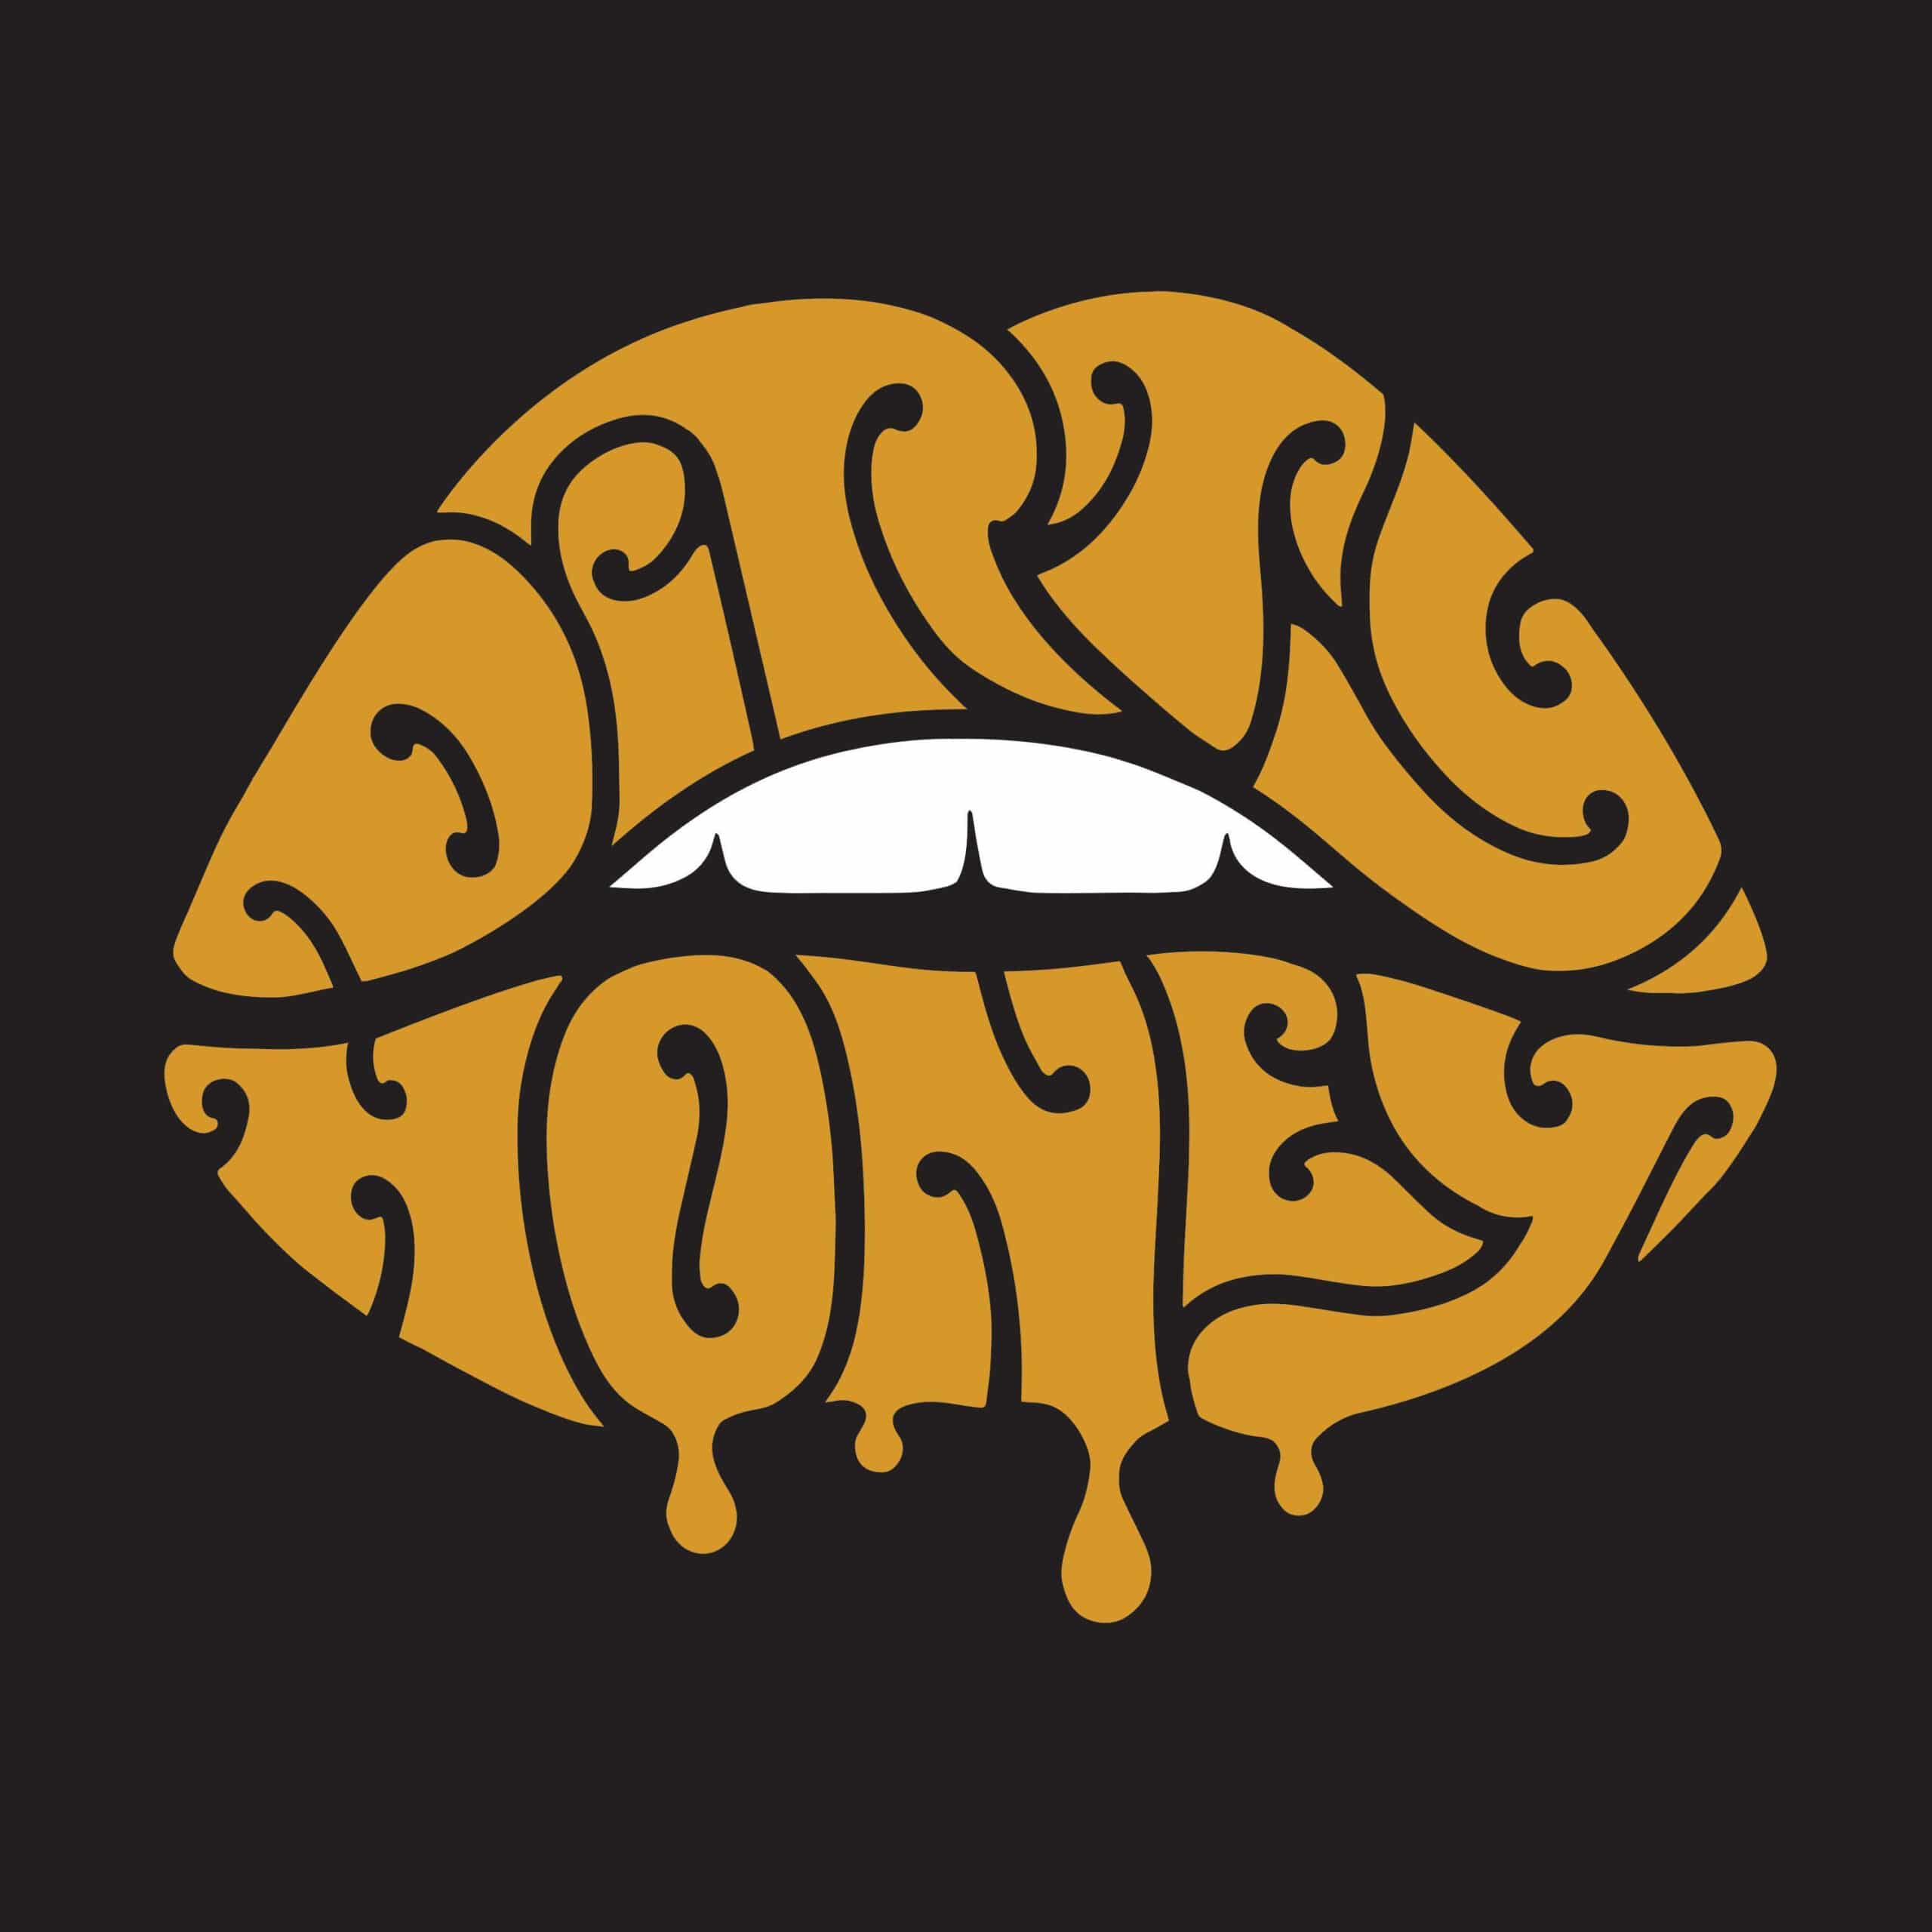 The cover to the band Dirty Honey's EP Dirty Honey